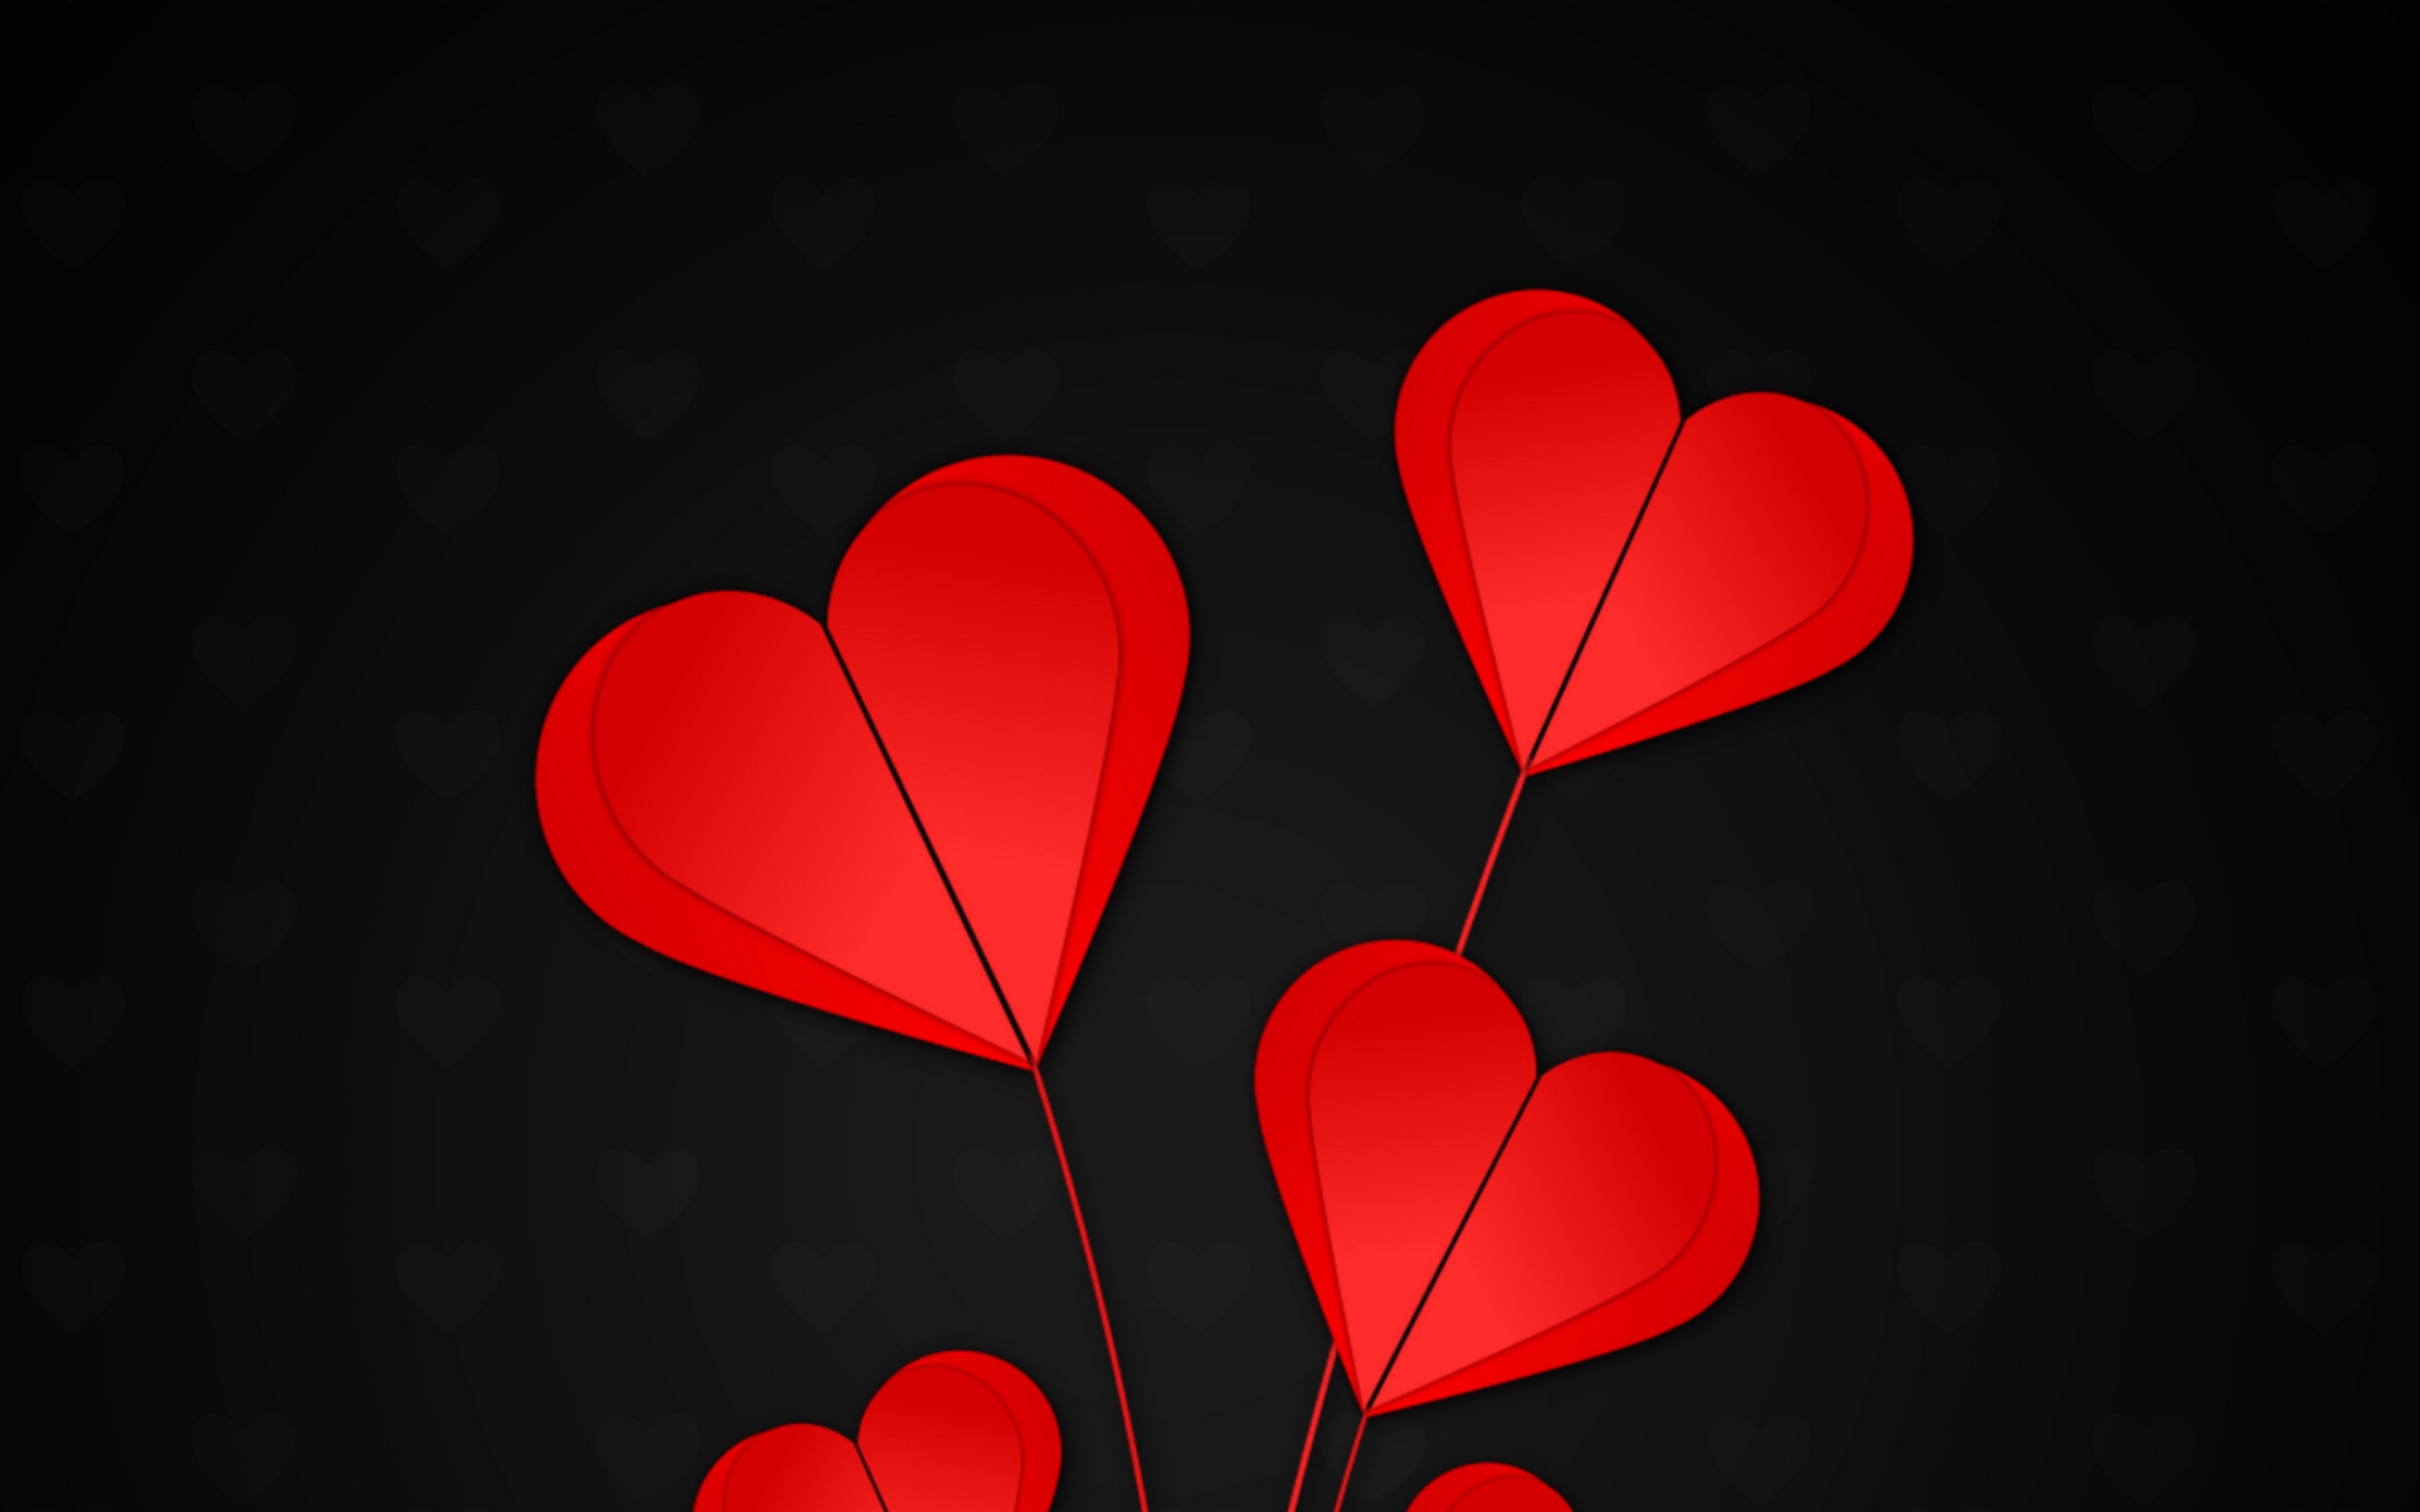 Wallpaper Hearts, Red, Black Background - Red And Black Hearts Wallpaper For Iphone - HD Wallpaper 